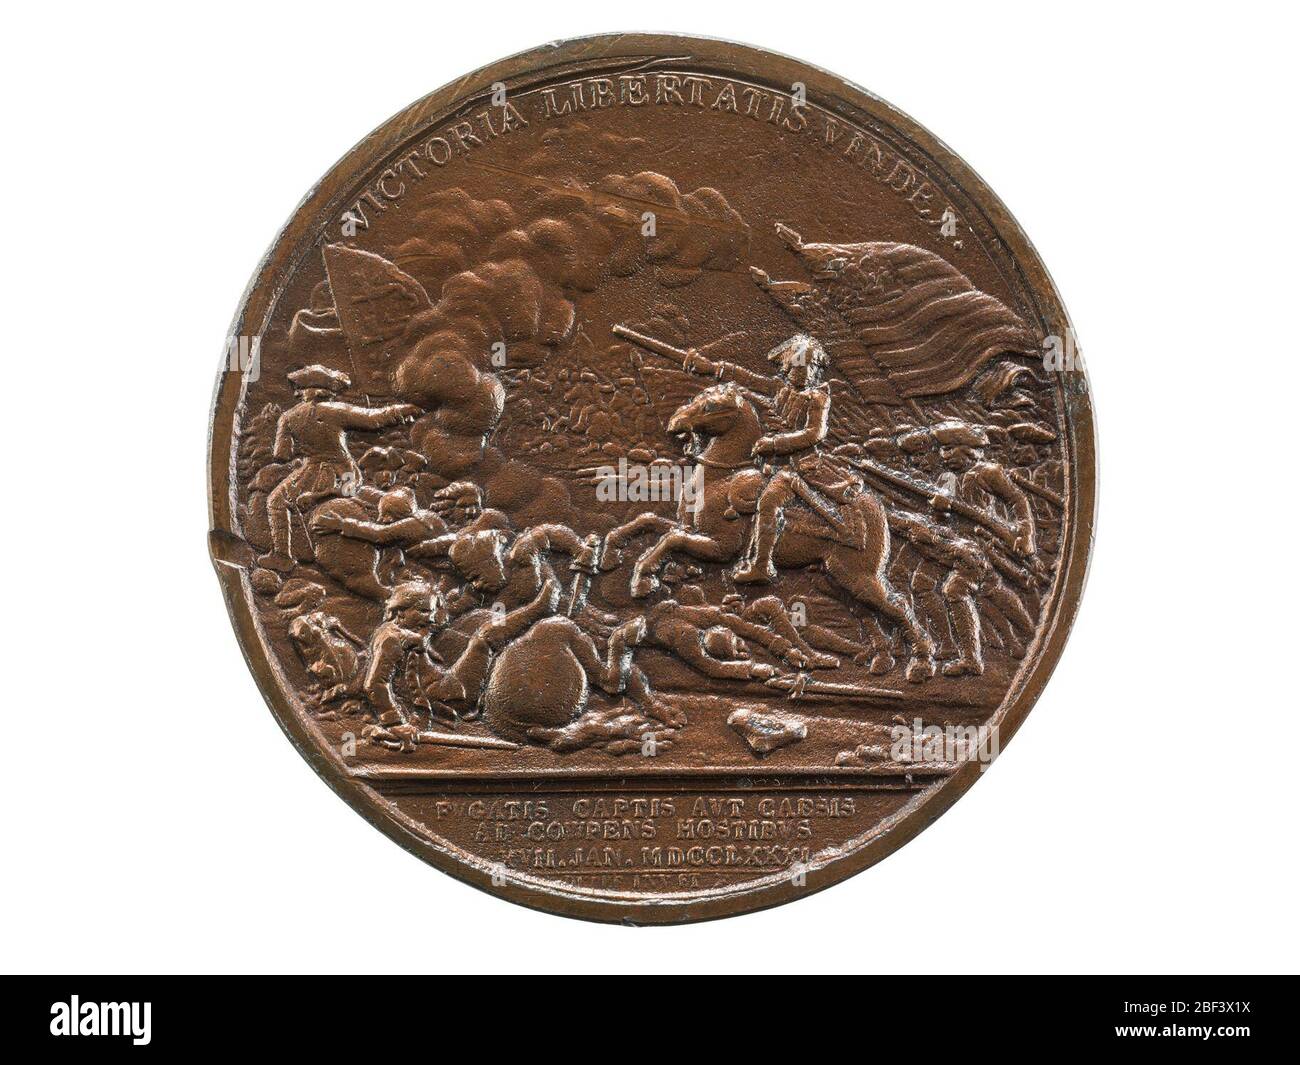 Daniel Morgan at the Cowpens United States 1781 Struck from 1839 Barr dies. One (1) Daniel Morgan at the Cowpens medal, (Comitia Americana)United States (France), 1781Obverse Image: Morgan leads an infantry change on horseback against a retreating British cavalry; another cavalry charge is visible in the background. Stock Photo